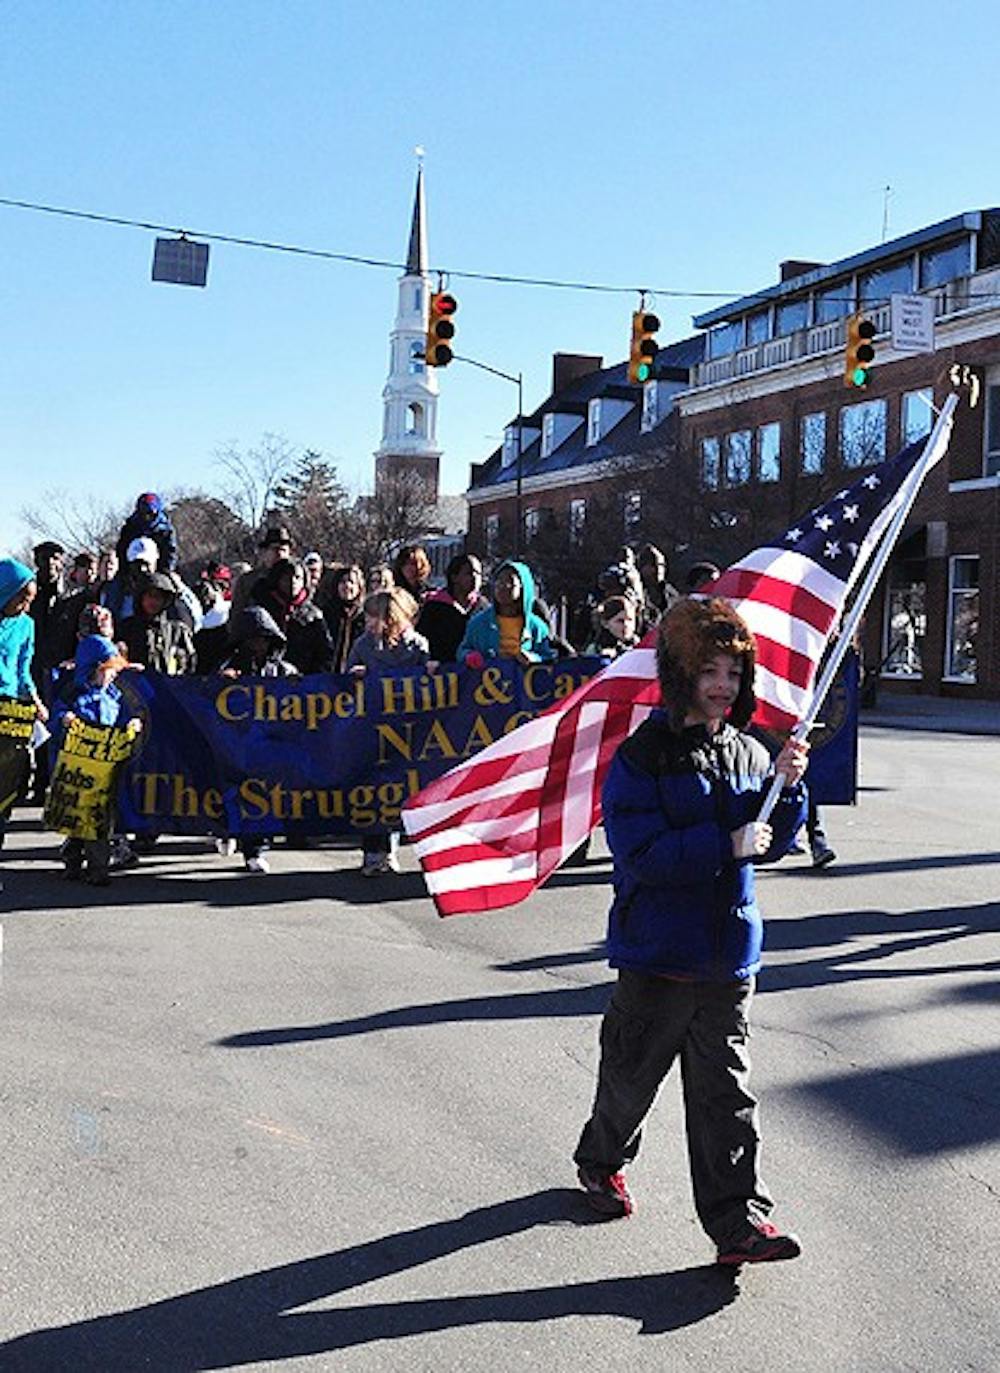 The rally, followed by a march, held in front of the Chapel Hill post office in honor of Martin Luther King Jr. Day